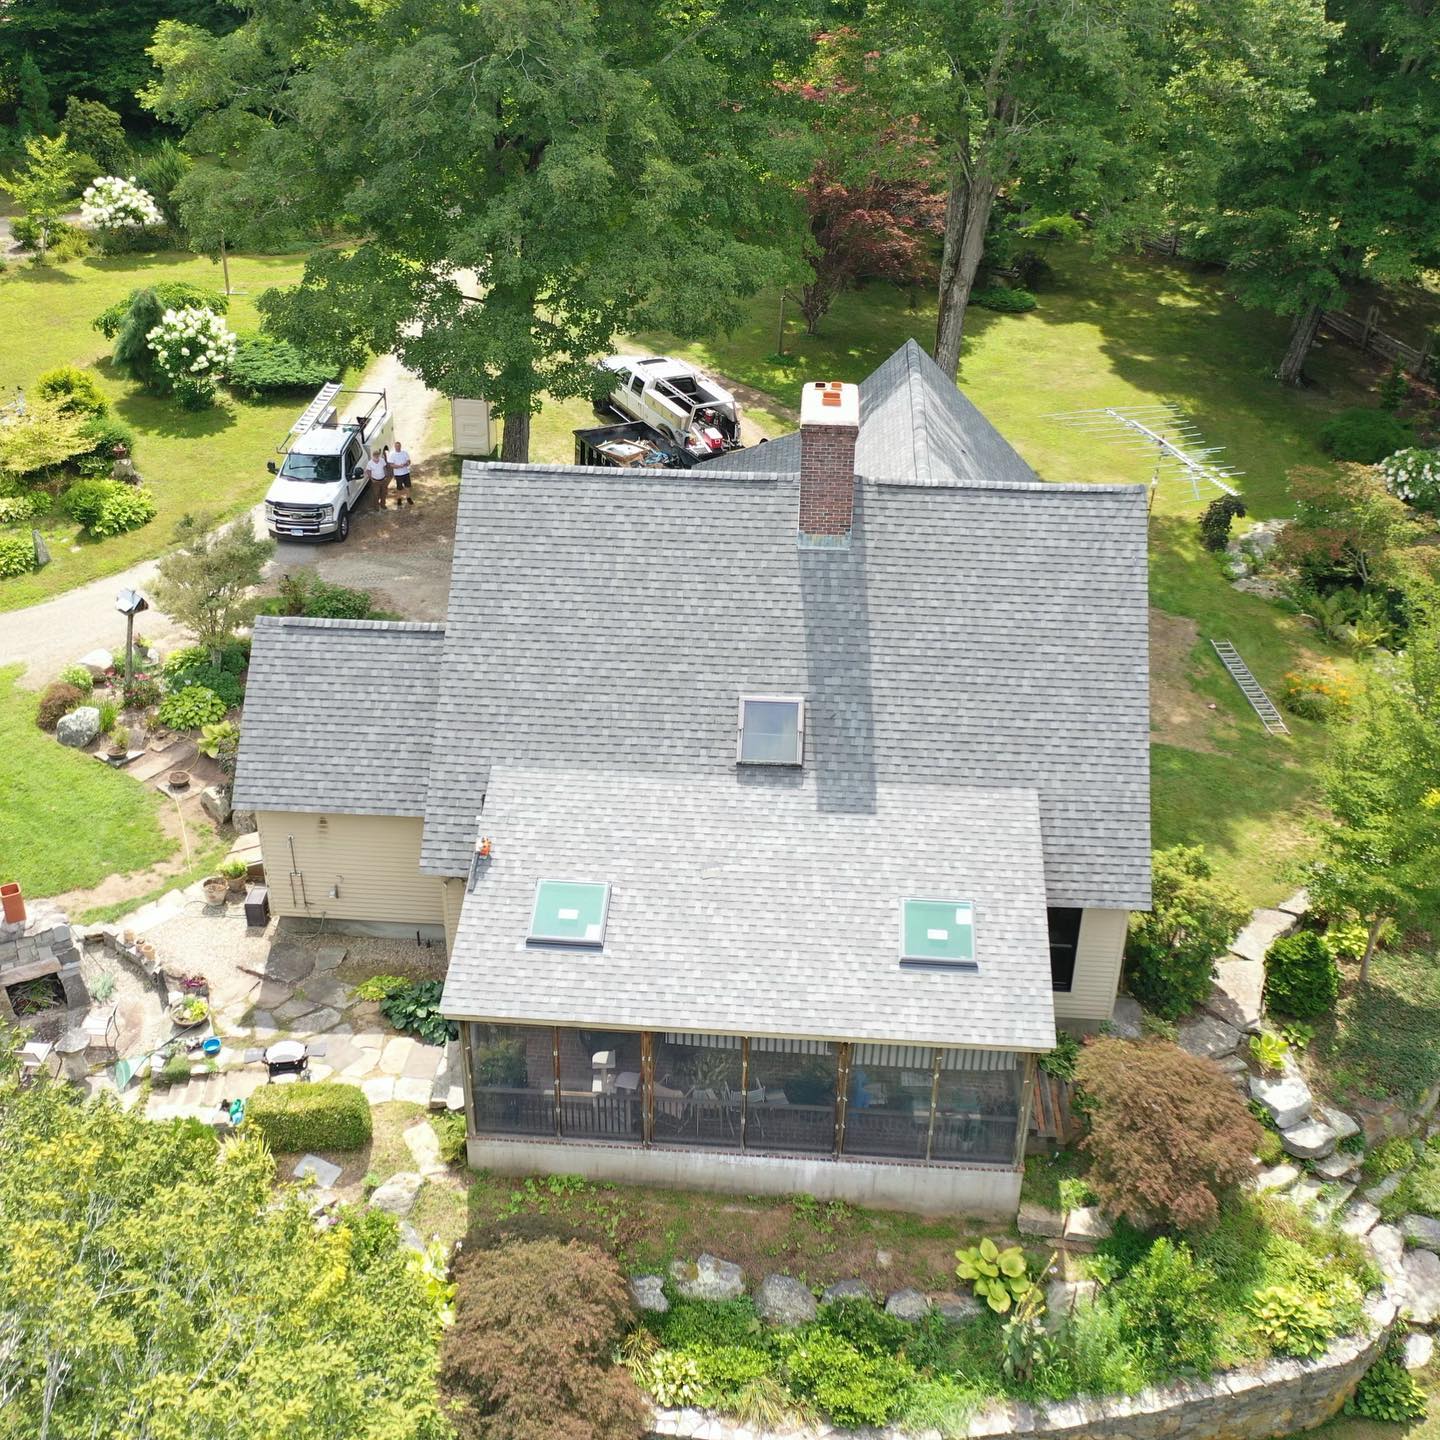 Lyme CT Roof Replacement 2 BP Builder Company in CT | Roofer, Roof Replacement, CT Roofing Company & General Contractor CT